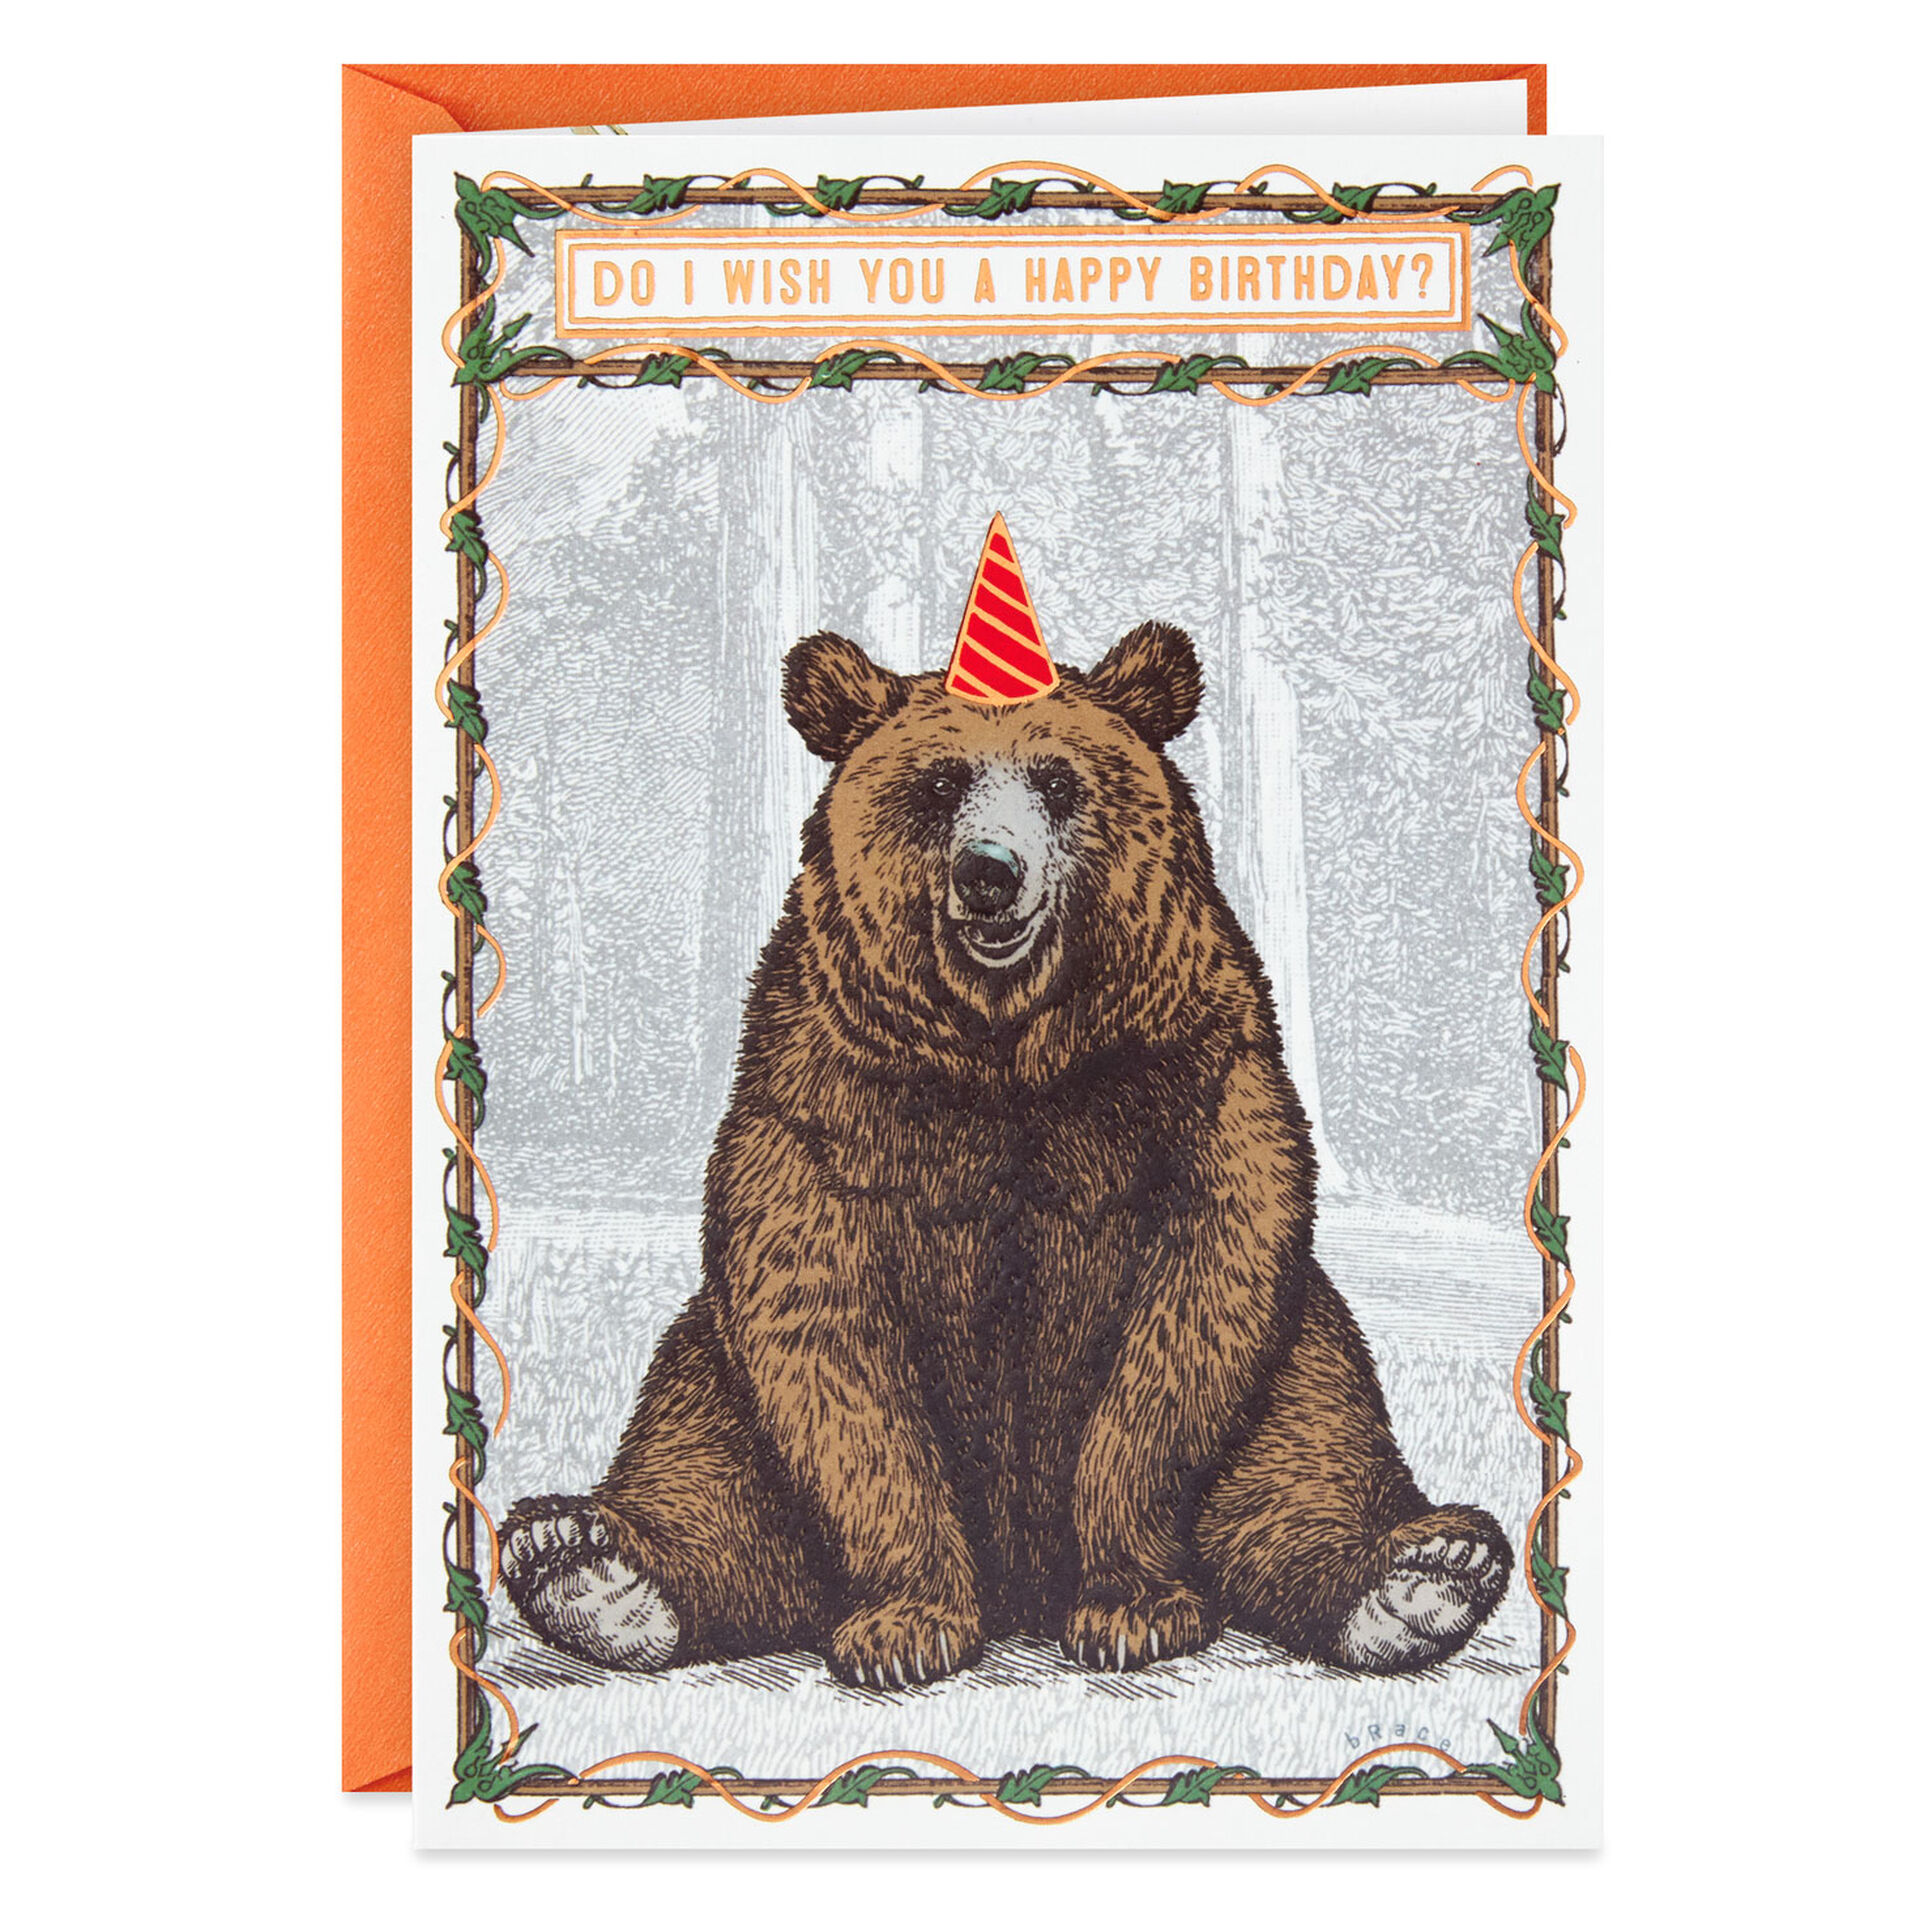 BIRTHDAY Bear Grizzly Colorful Fur Little Bees Birthday Greeting Card NEW